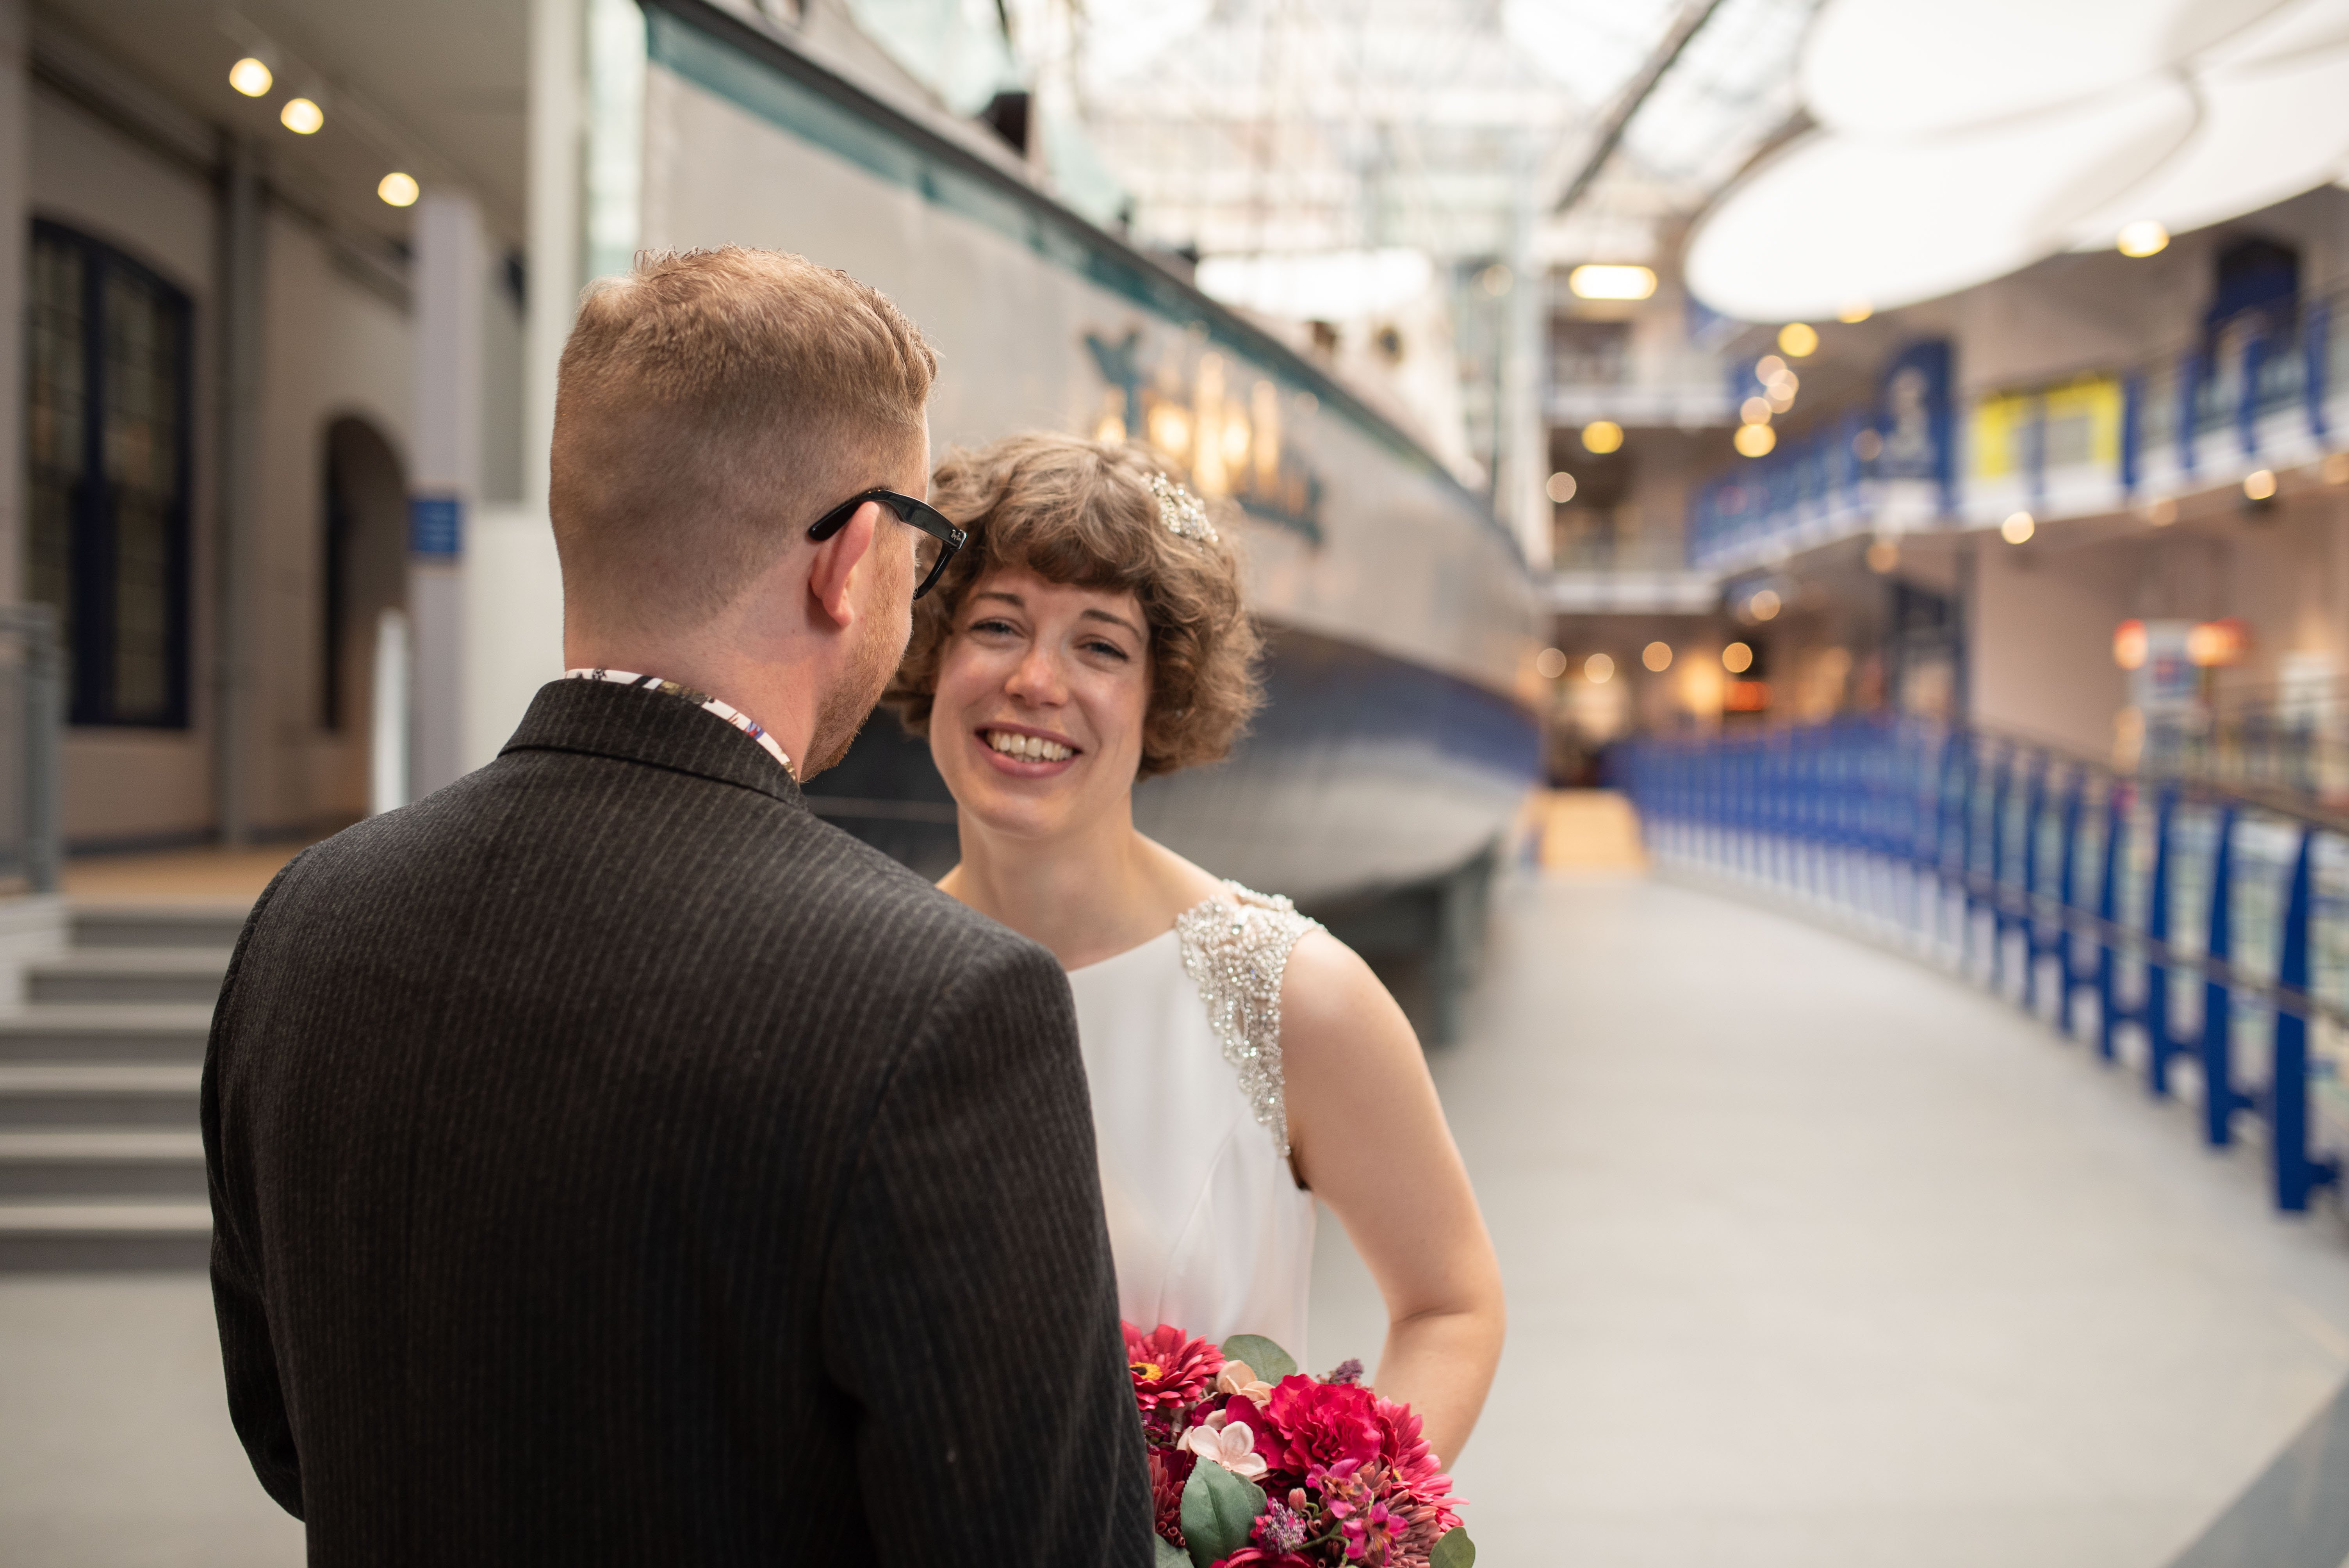 Discovery Museum wedding photograph by Laurence Sweeney Photography